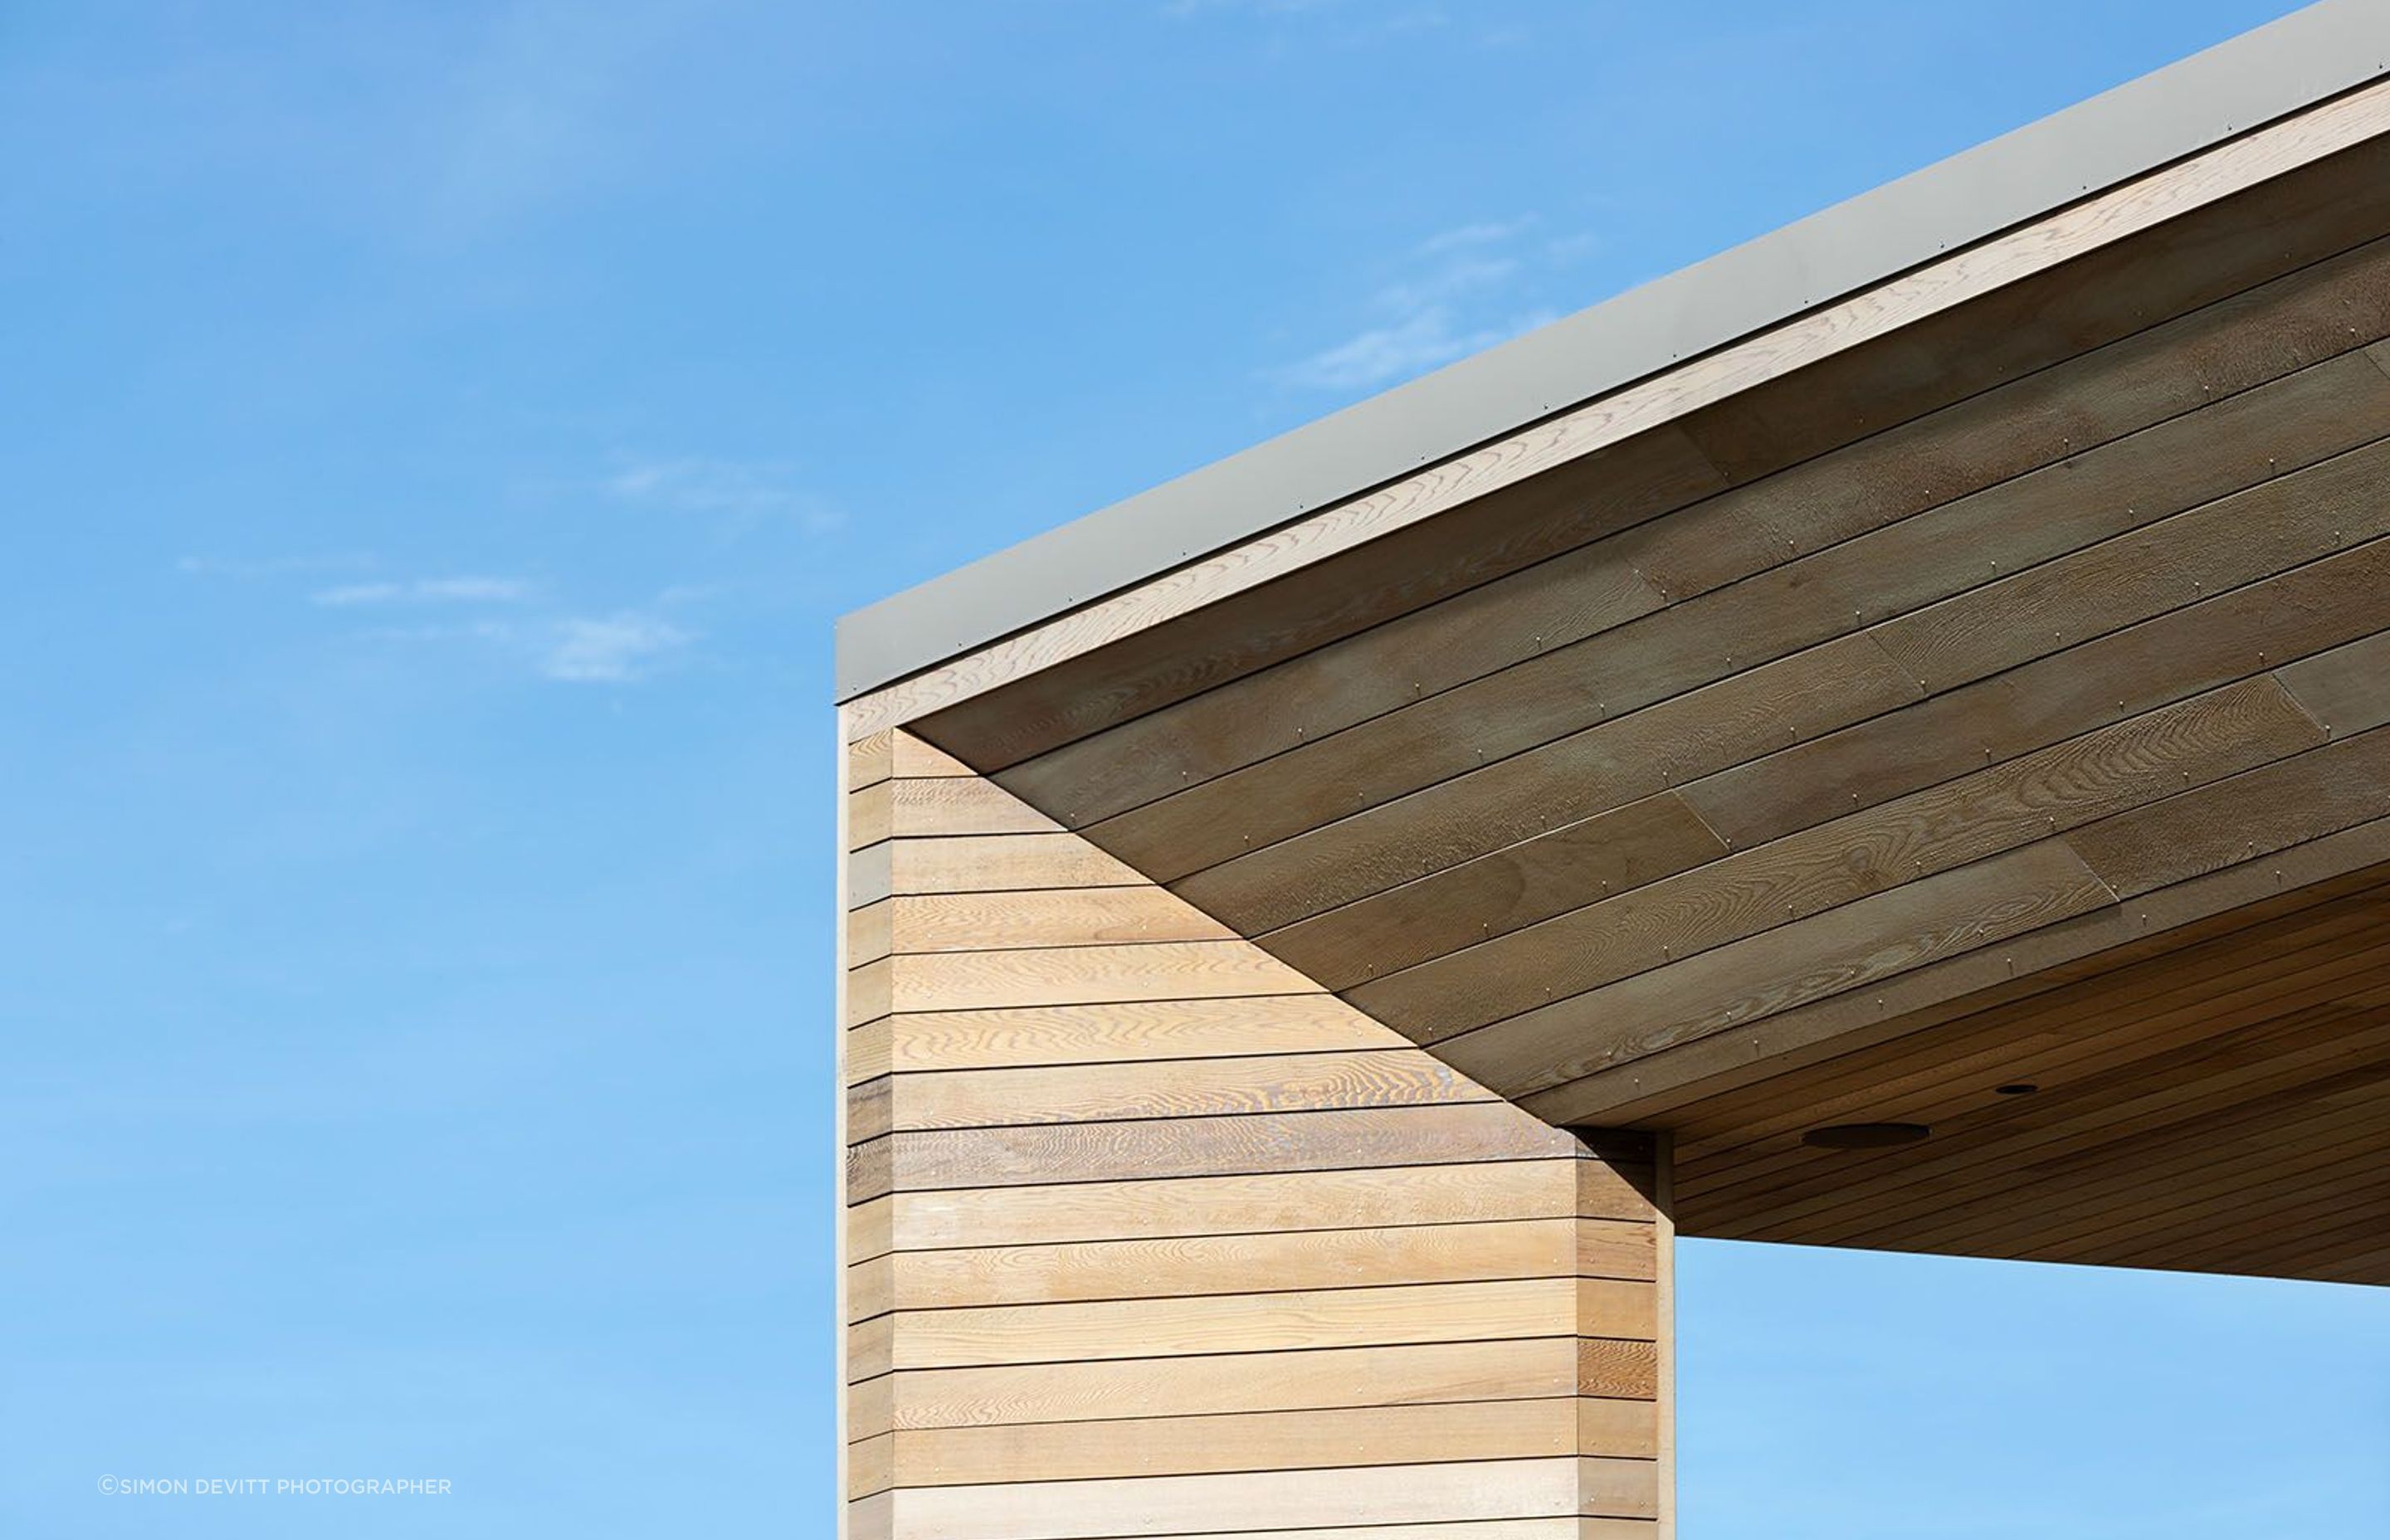 A close-up view of the cedar cladding and sofft on the balcony, which angles inwards to create a distinctive faceted effect.